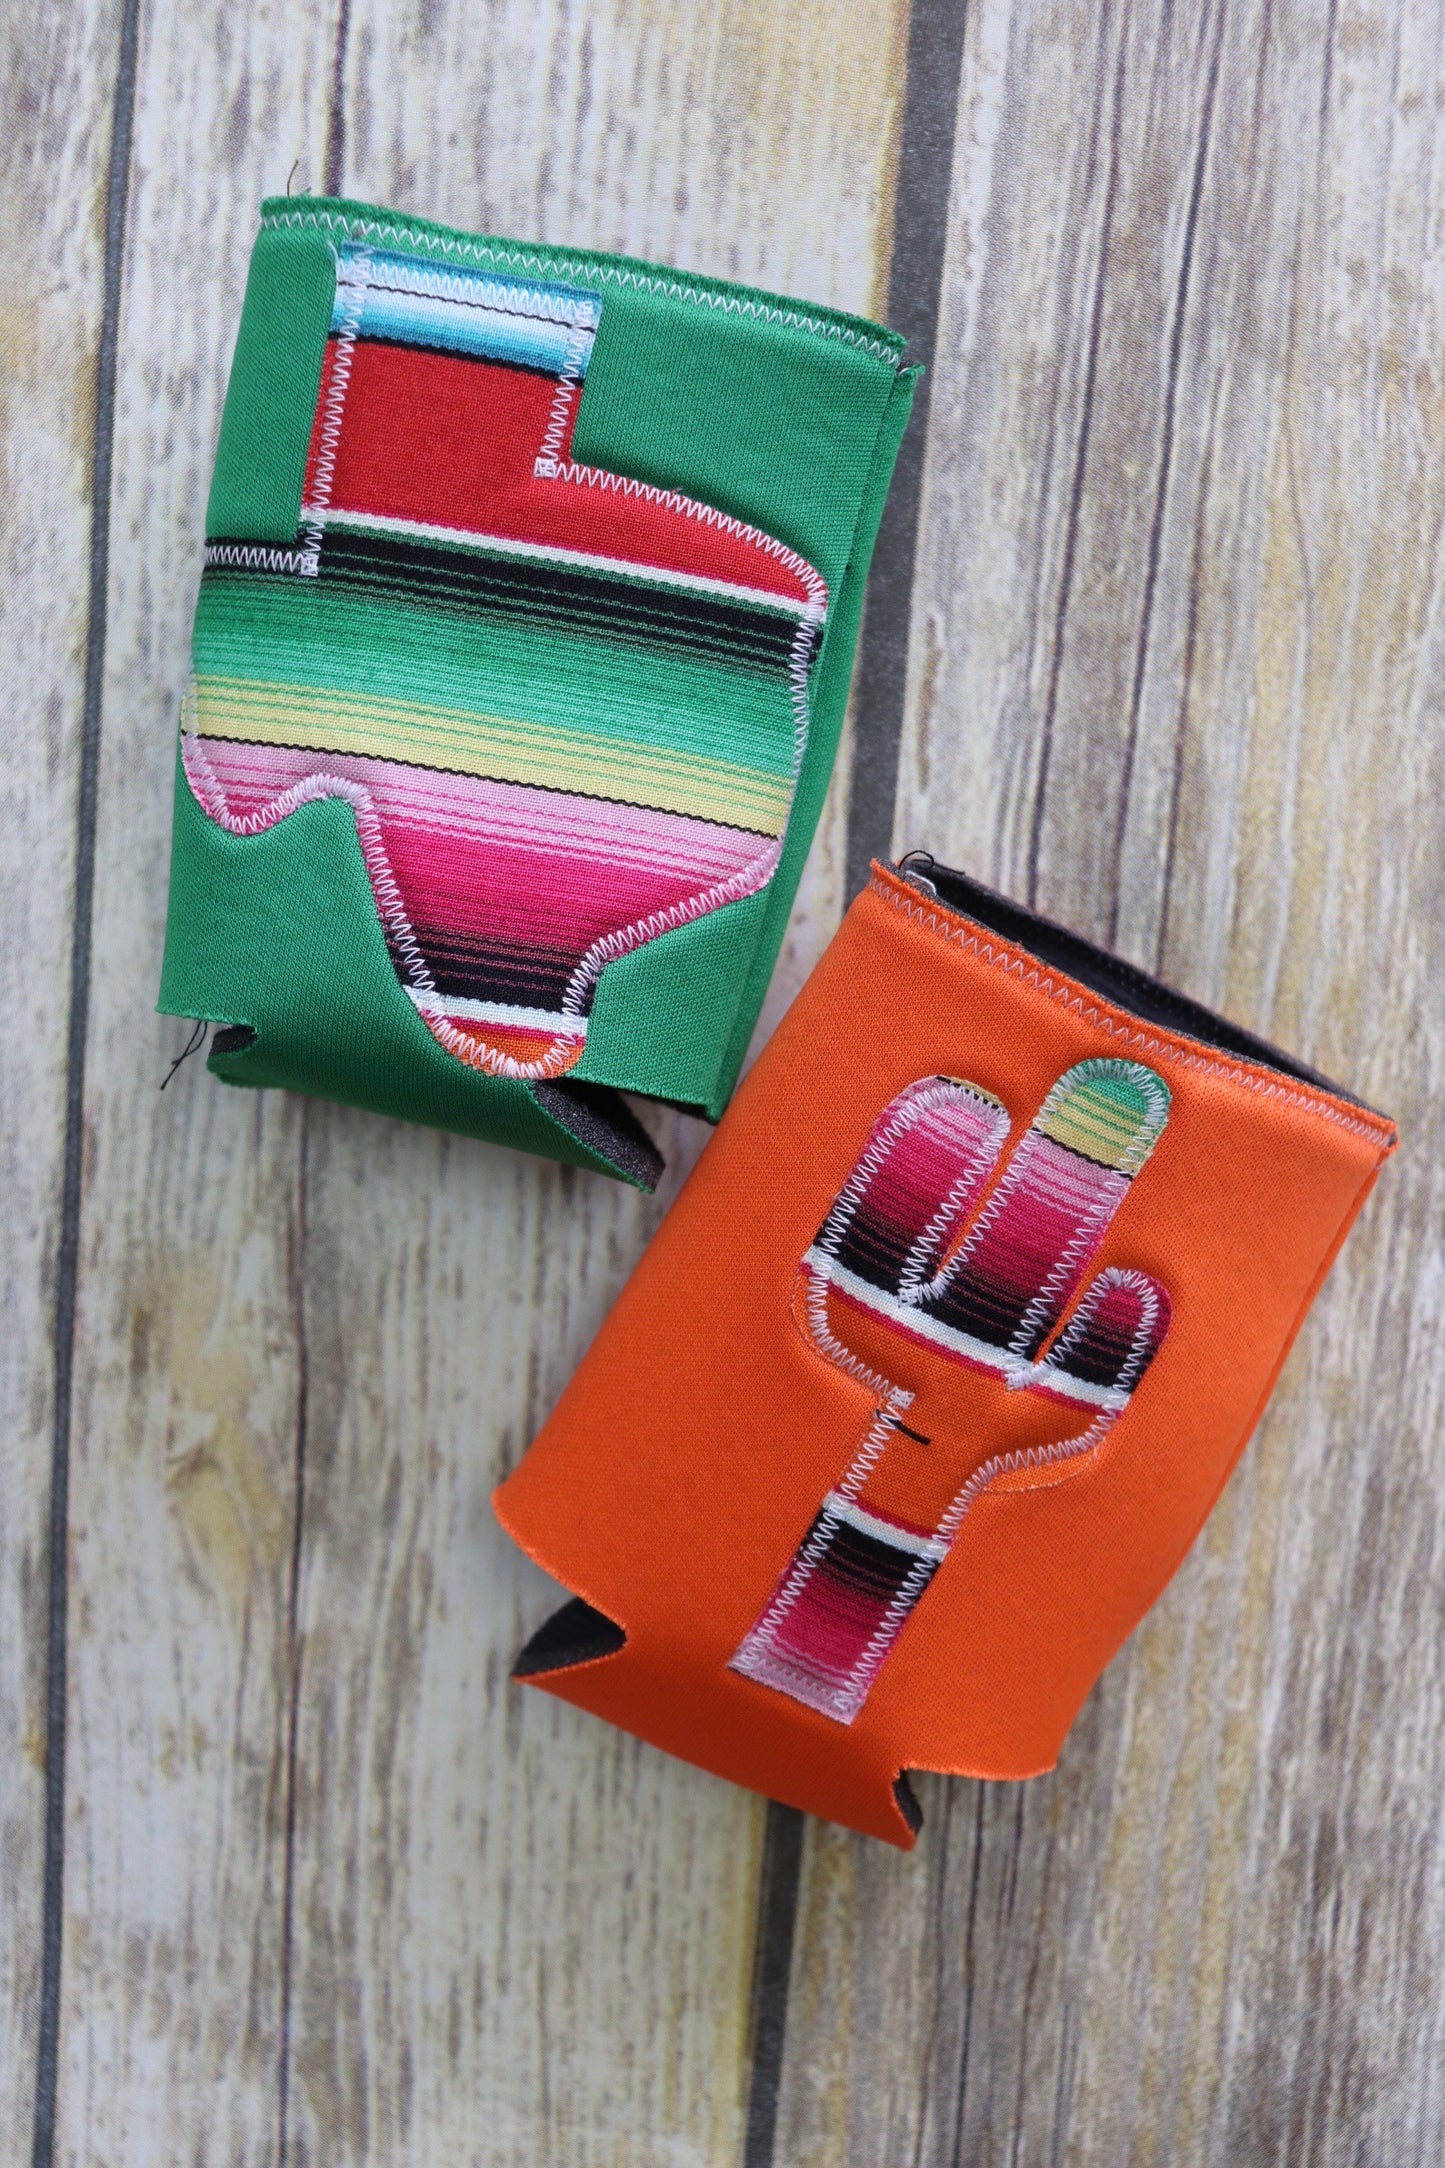 Agave Red Serape Can Holder